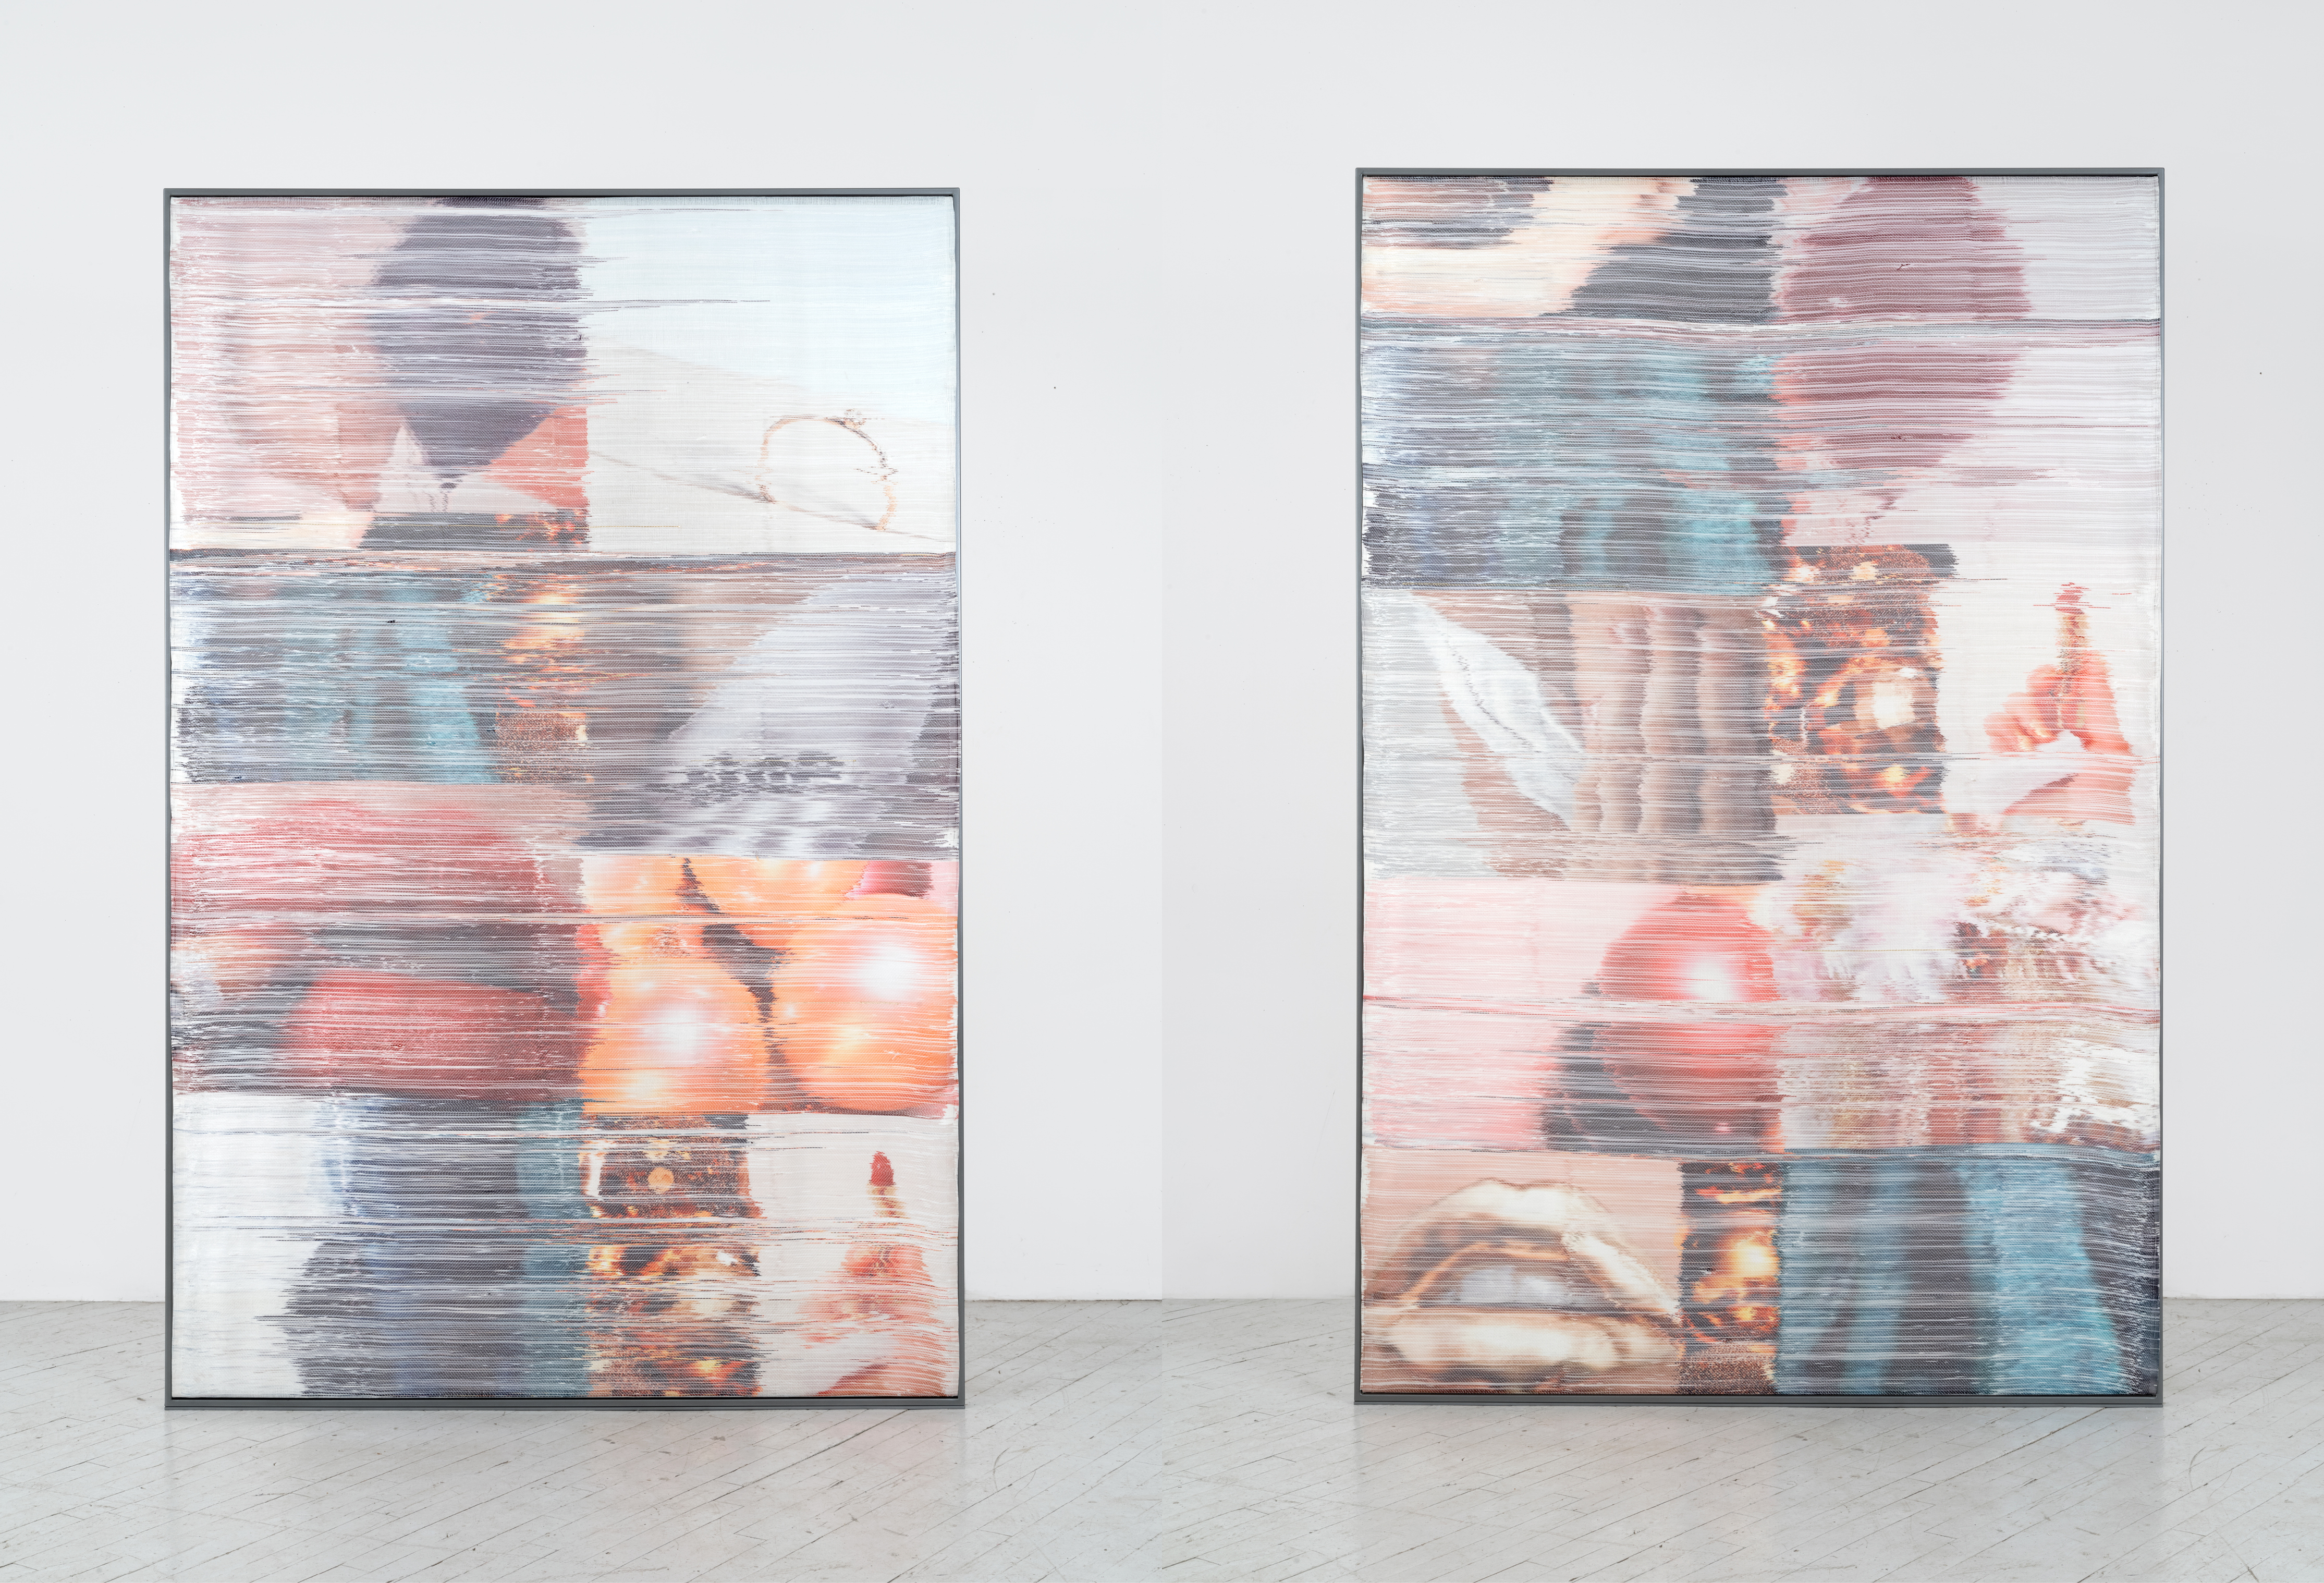 Left: Margo Wolowiec, 'All that glitters II,' 2016.Right: Margo Wolowiec, 'All that glitters I,' 2016.